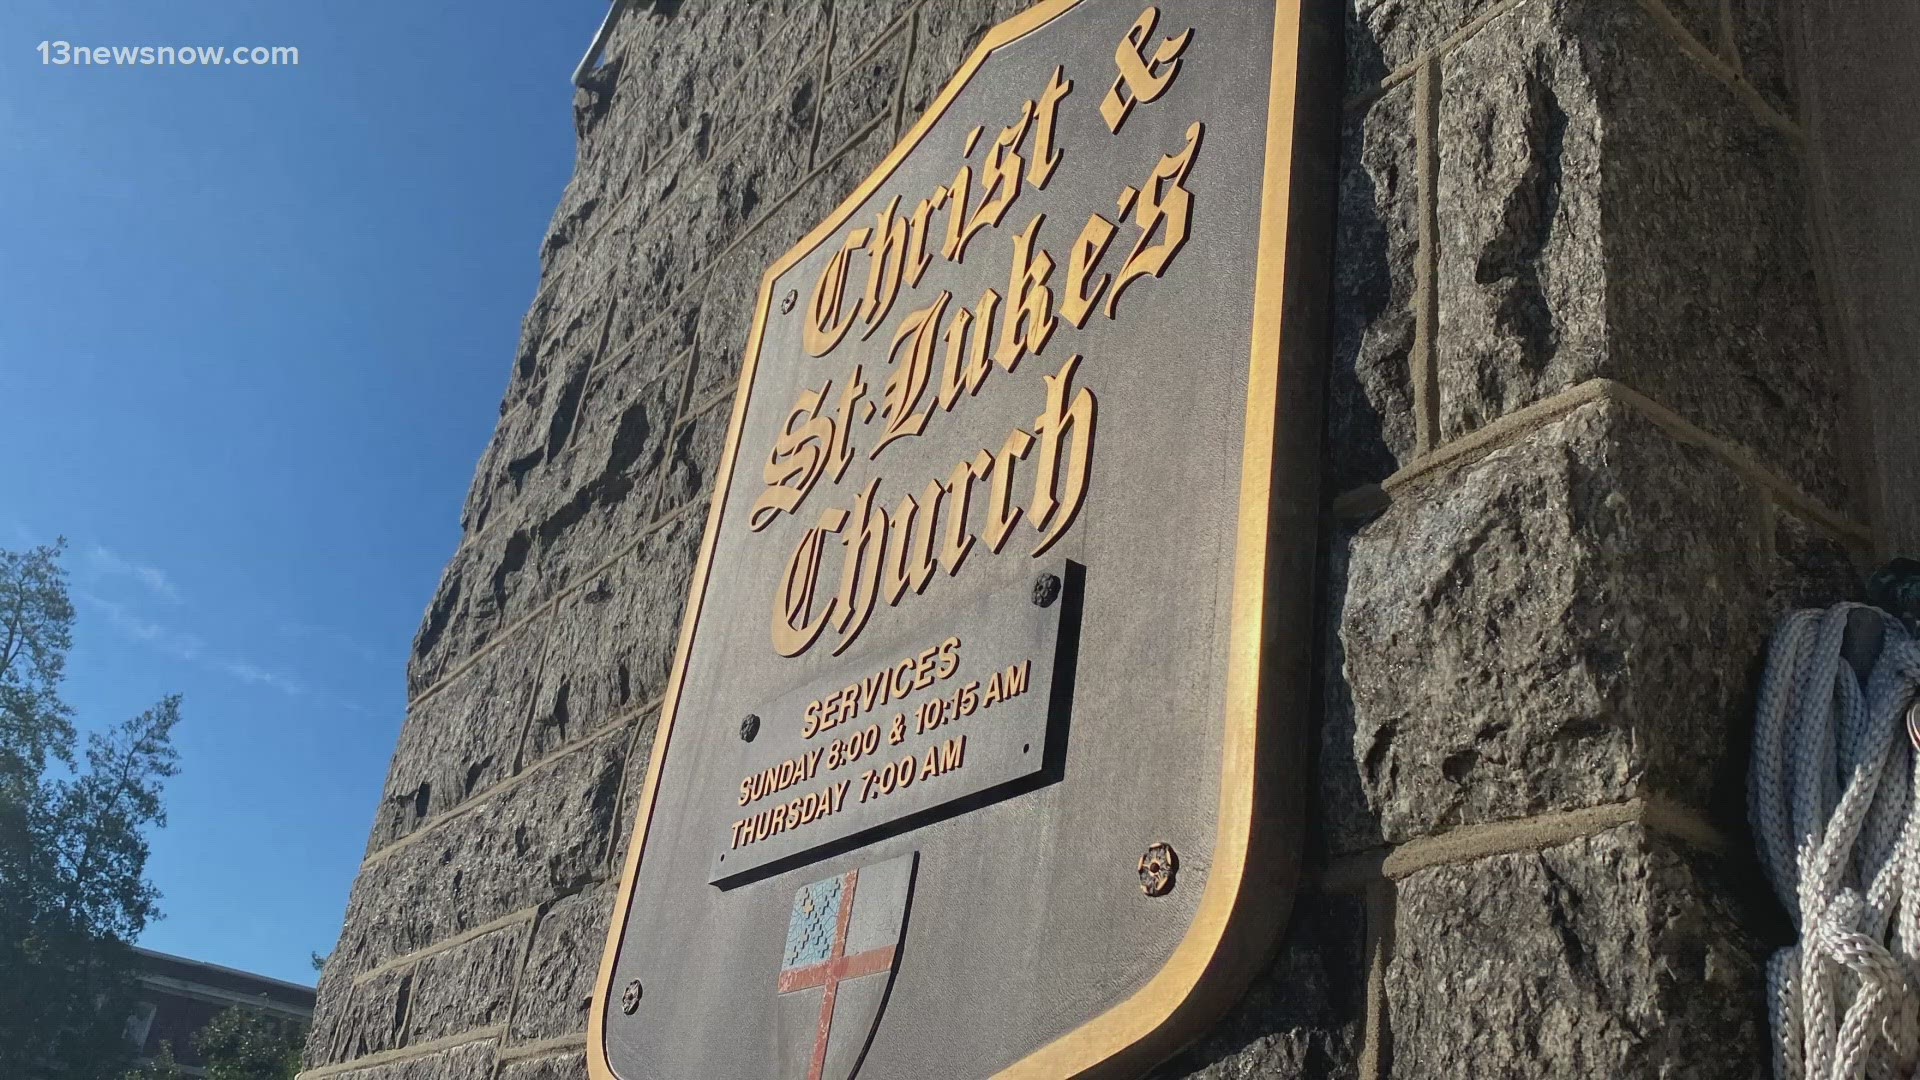 Scammers were reportedly pretending to be church leaders at Christ and St. Luke's Episcopal Church, asking for gift cards and money.